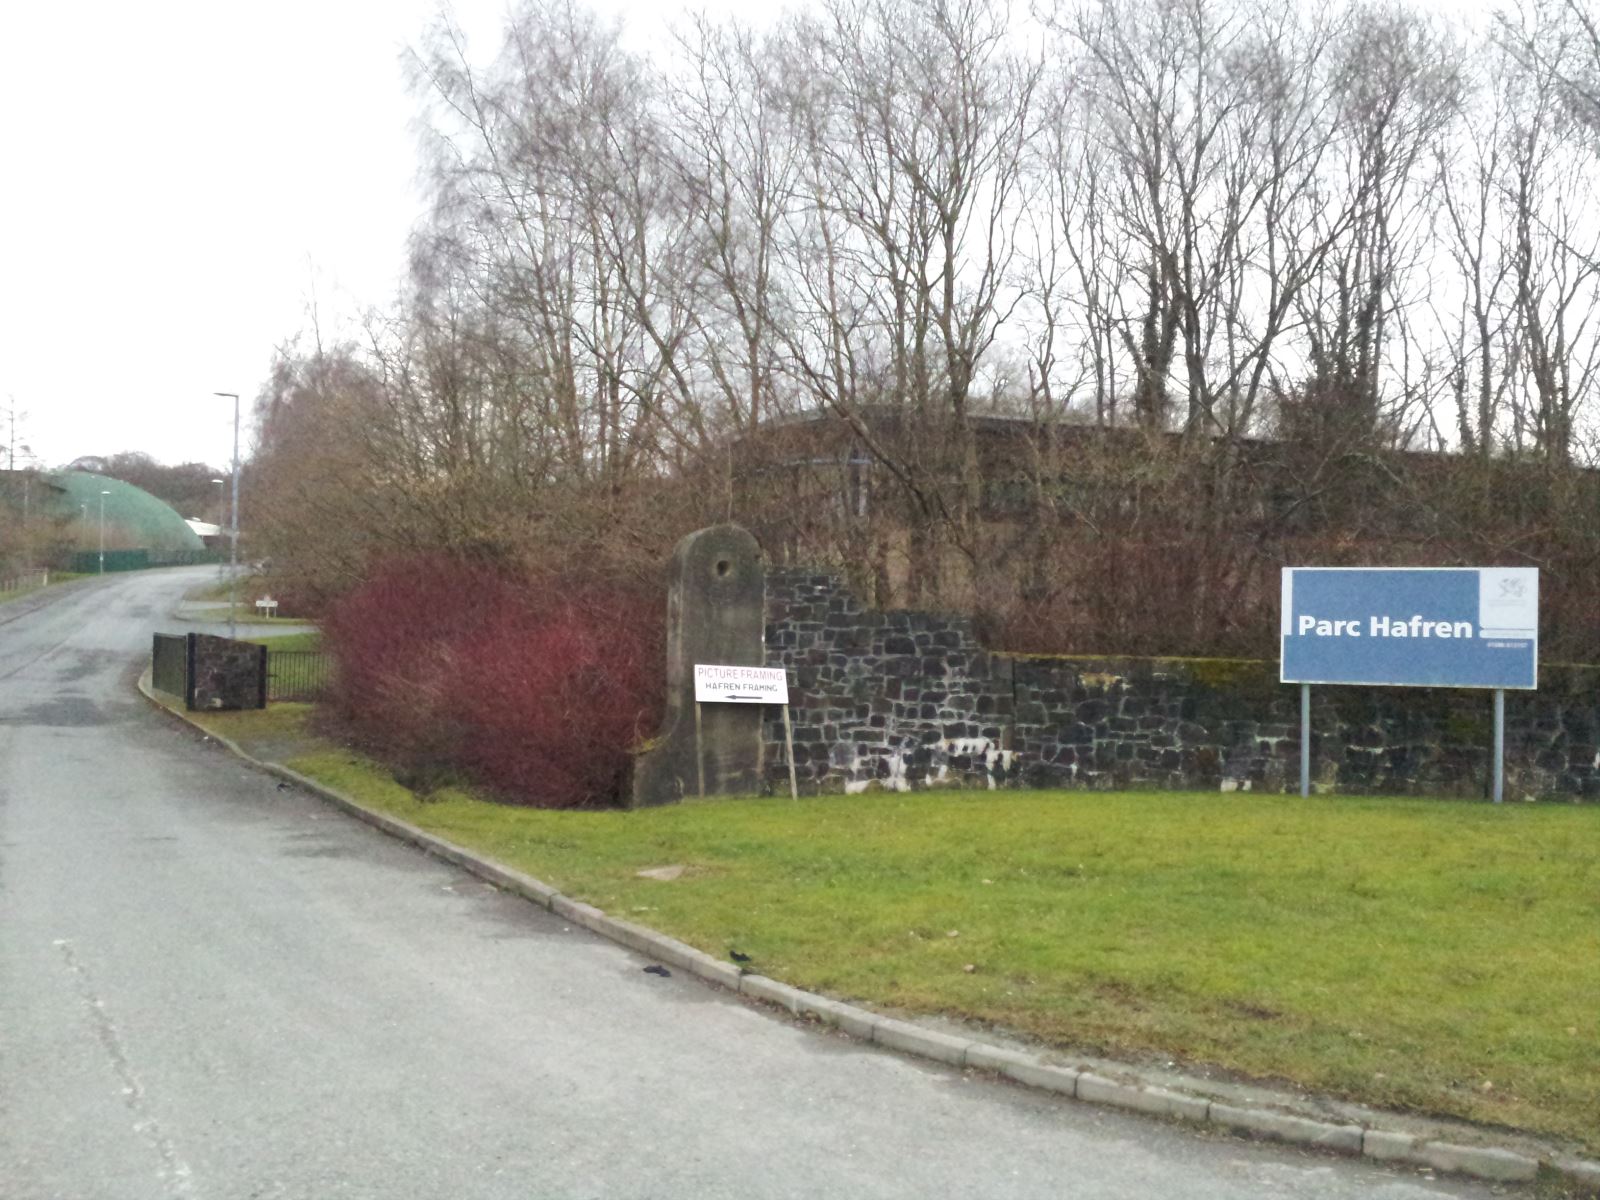 The Llanidloes Industrial Estate near the turning